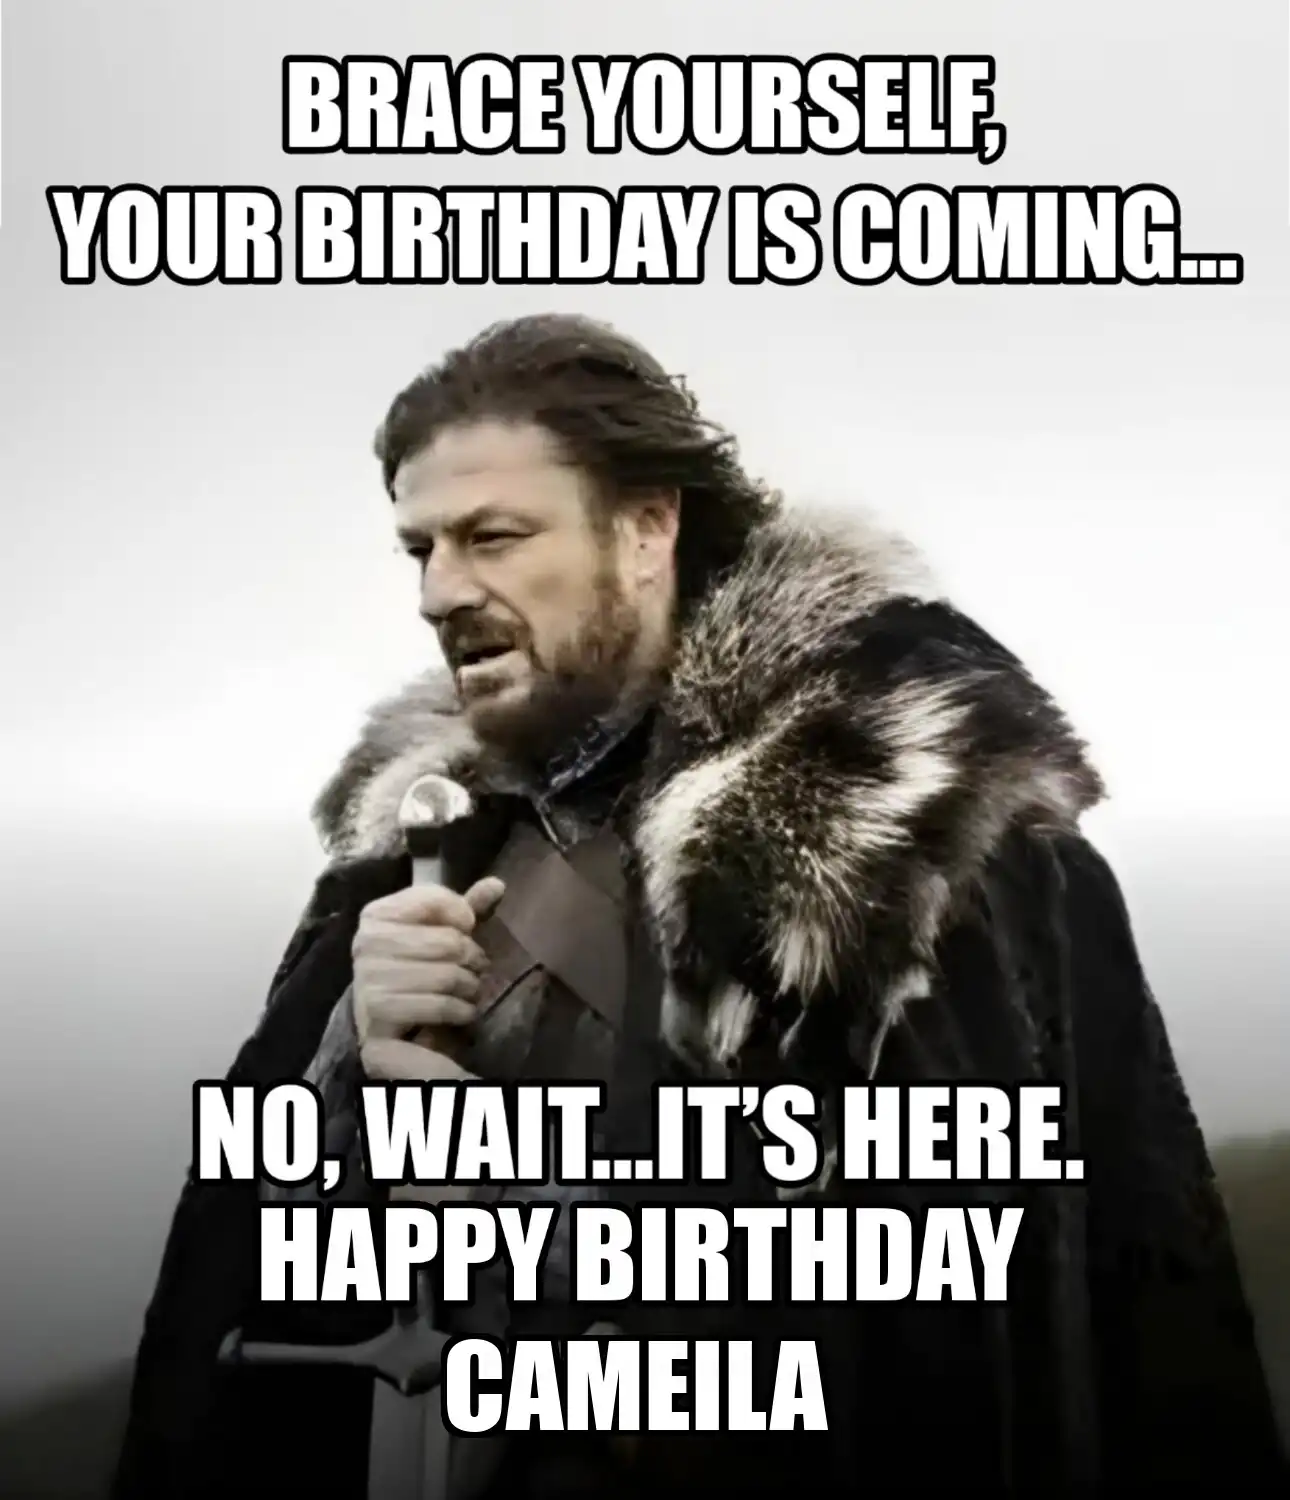 Happy Birthday Cameila Brace Yourself Your Birthday Is Coming Meme